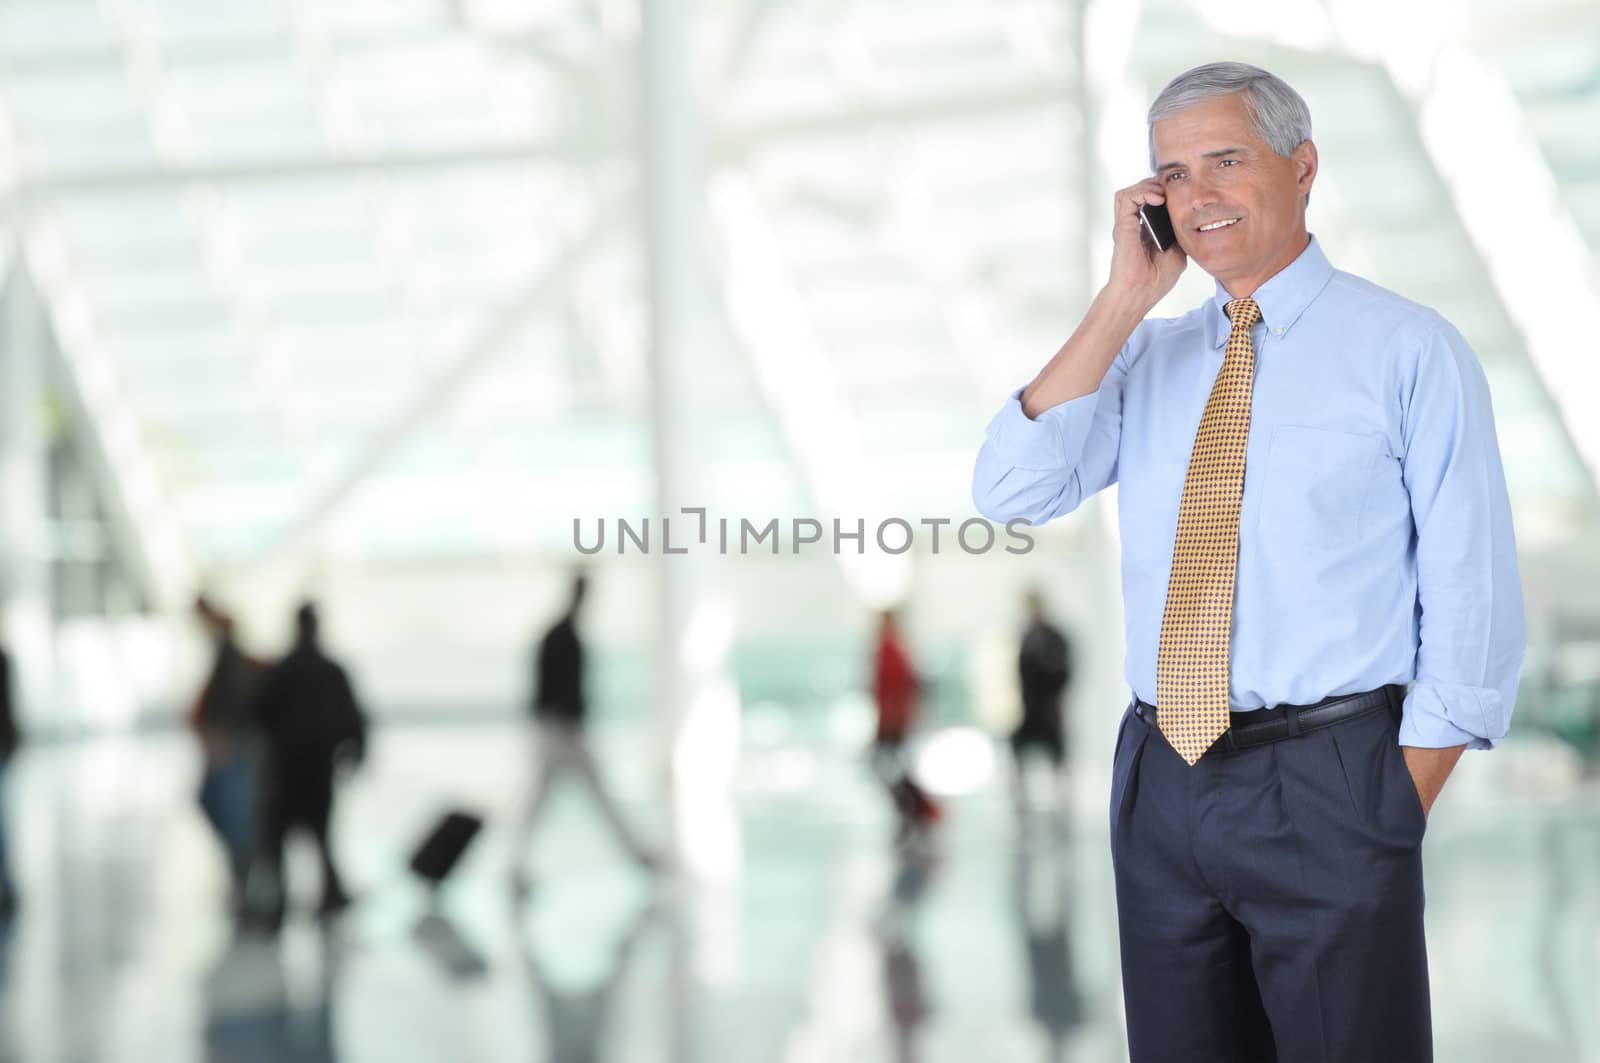 Middle aged Business Traveler Talking on Cell Phone in Airport Concourse with blurred travelers in background